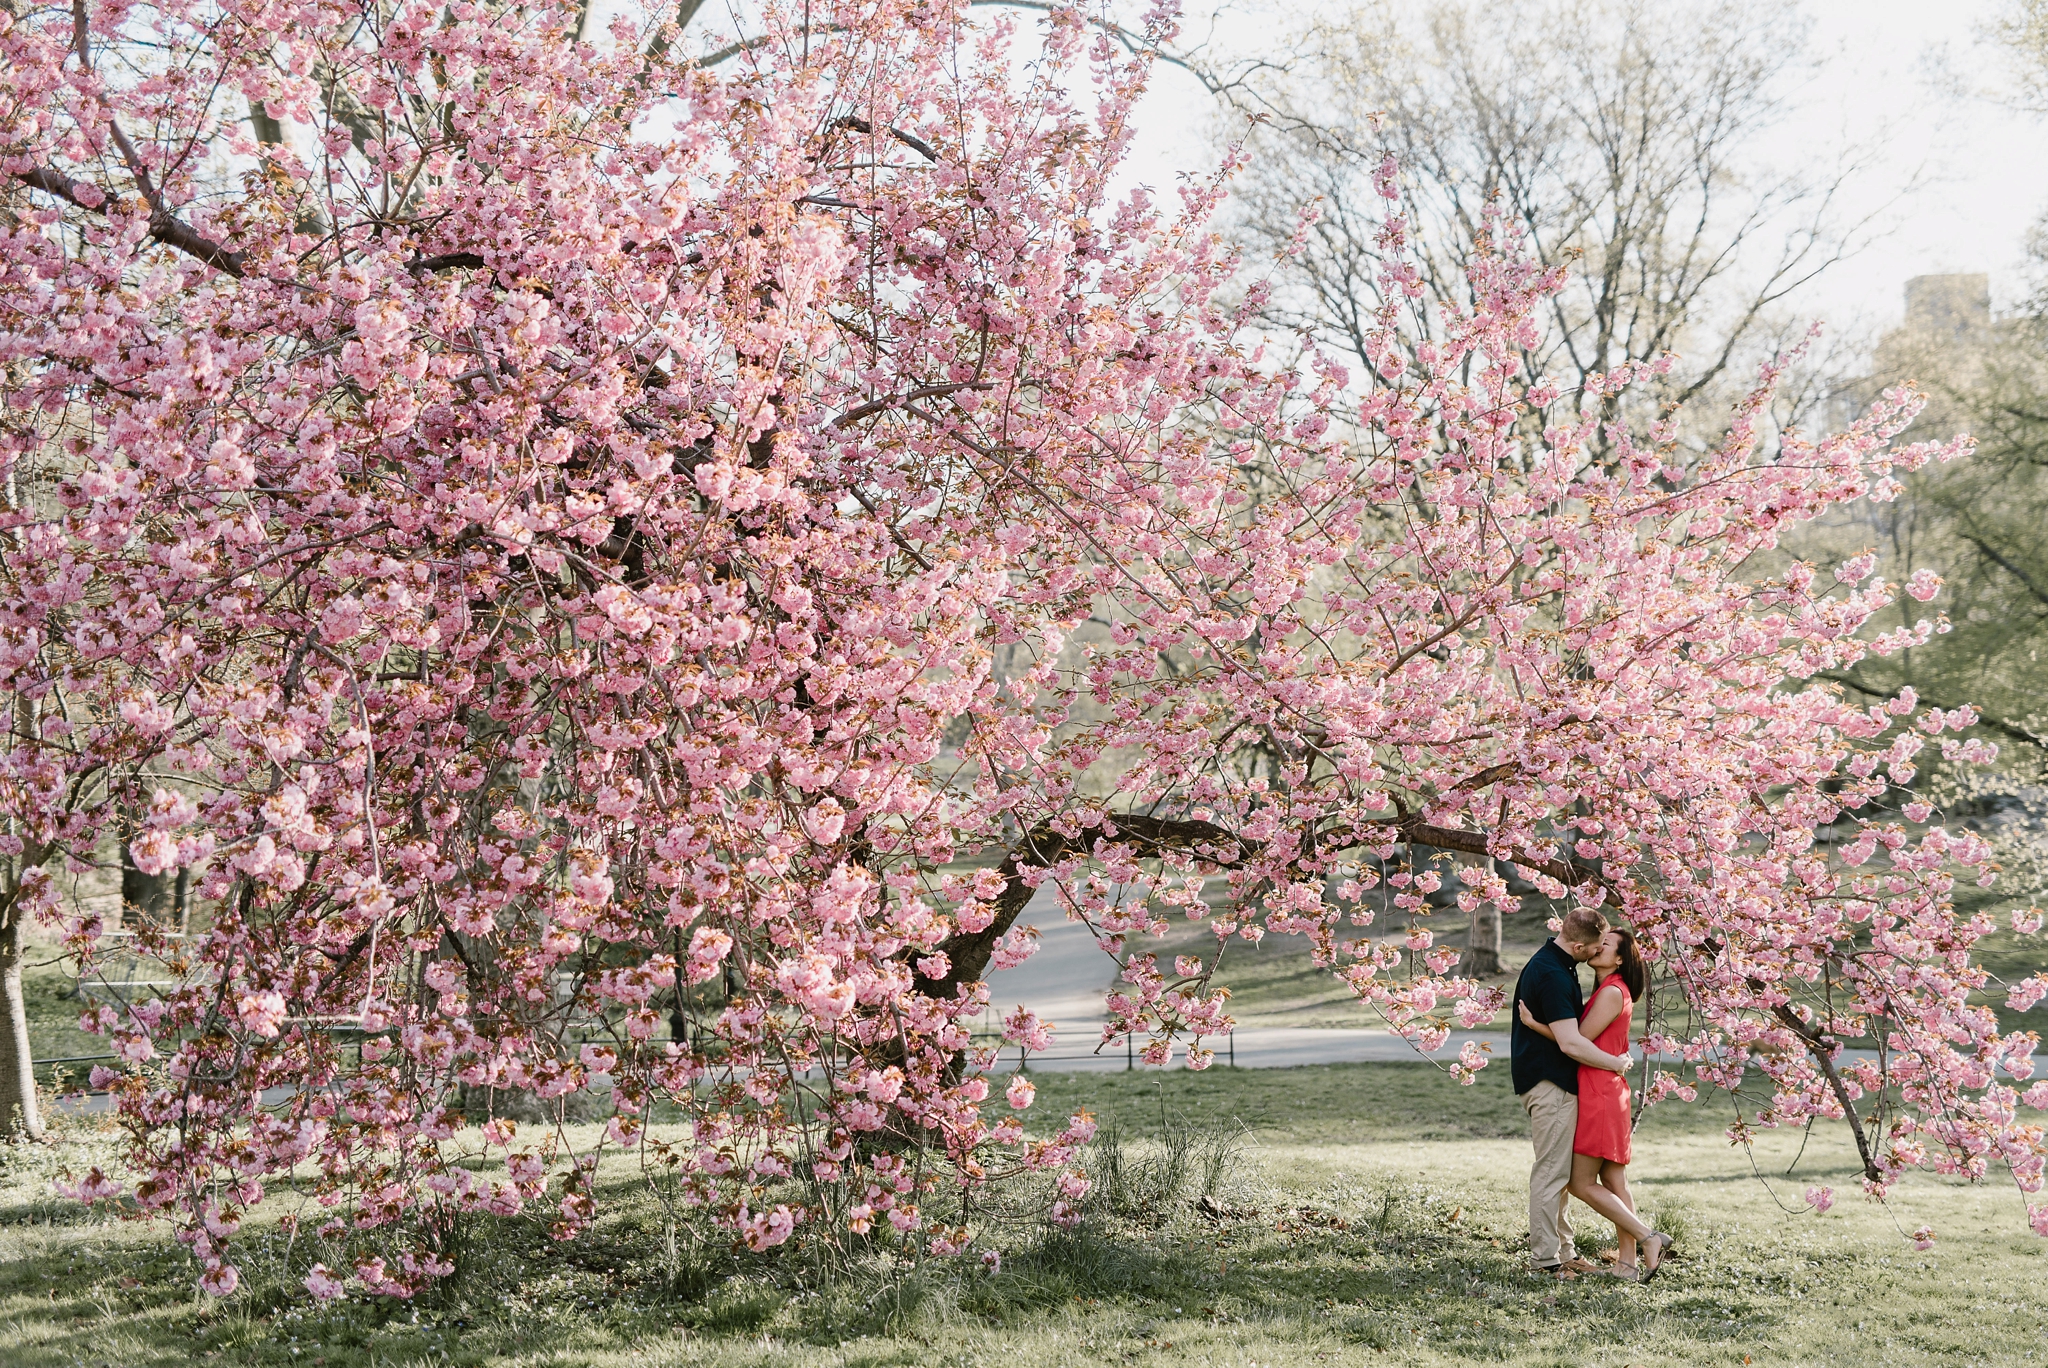 spring central park engagement photos cherry blossoms lindsay hackney